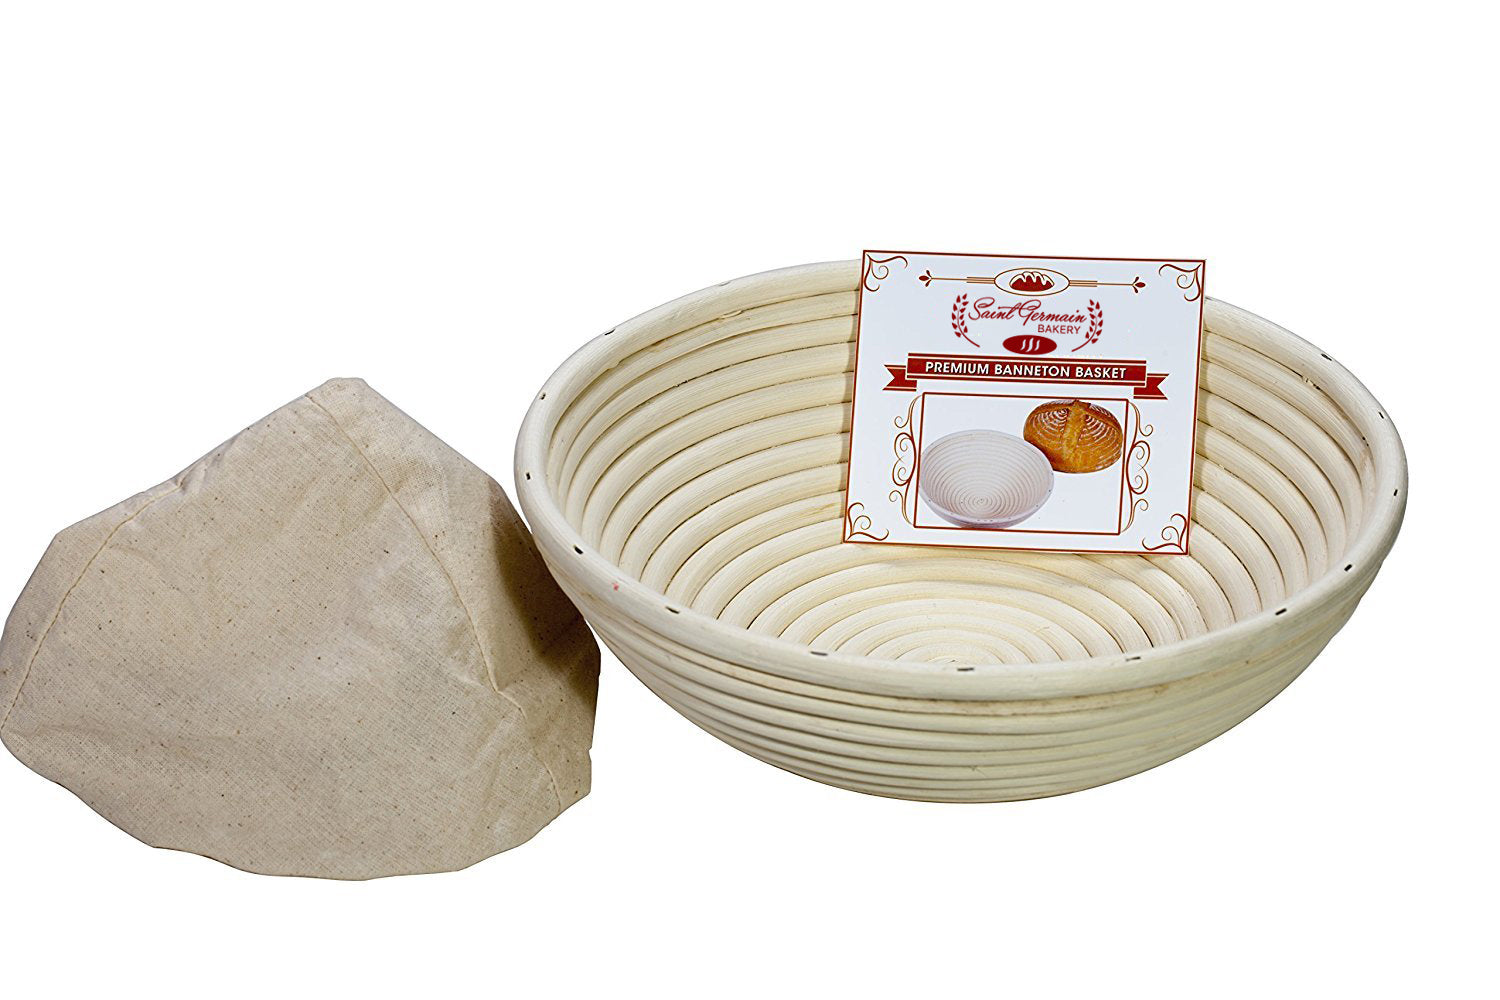 Round Banneton Proofing Basket with Liner - Saint Germain Bakery